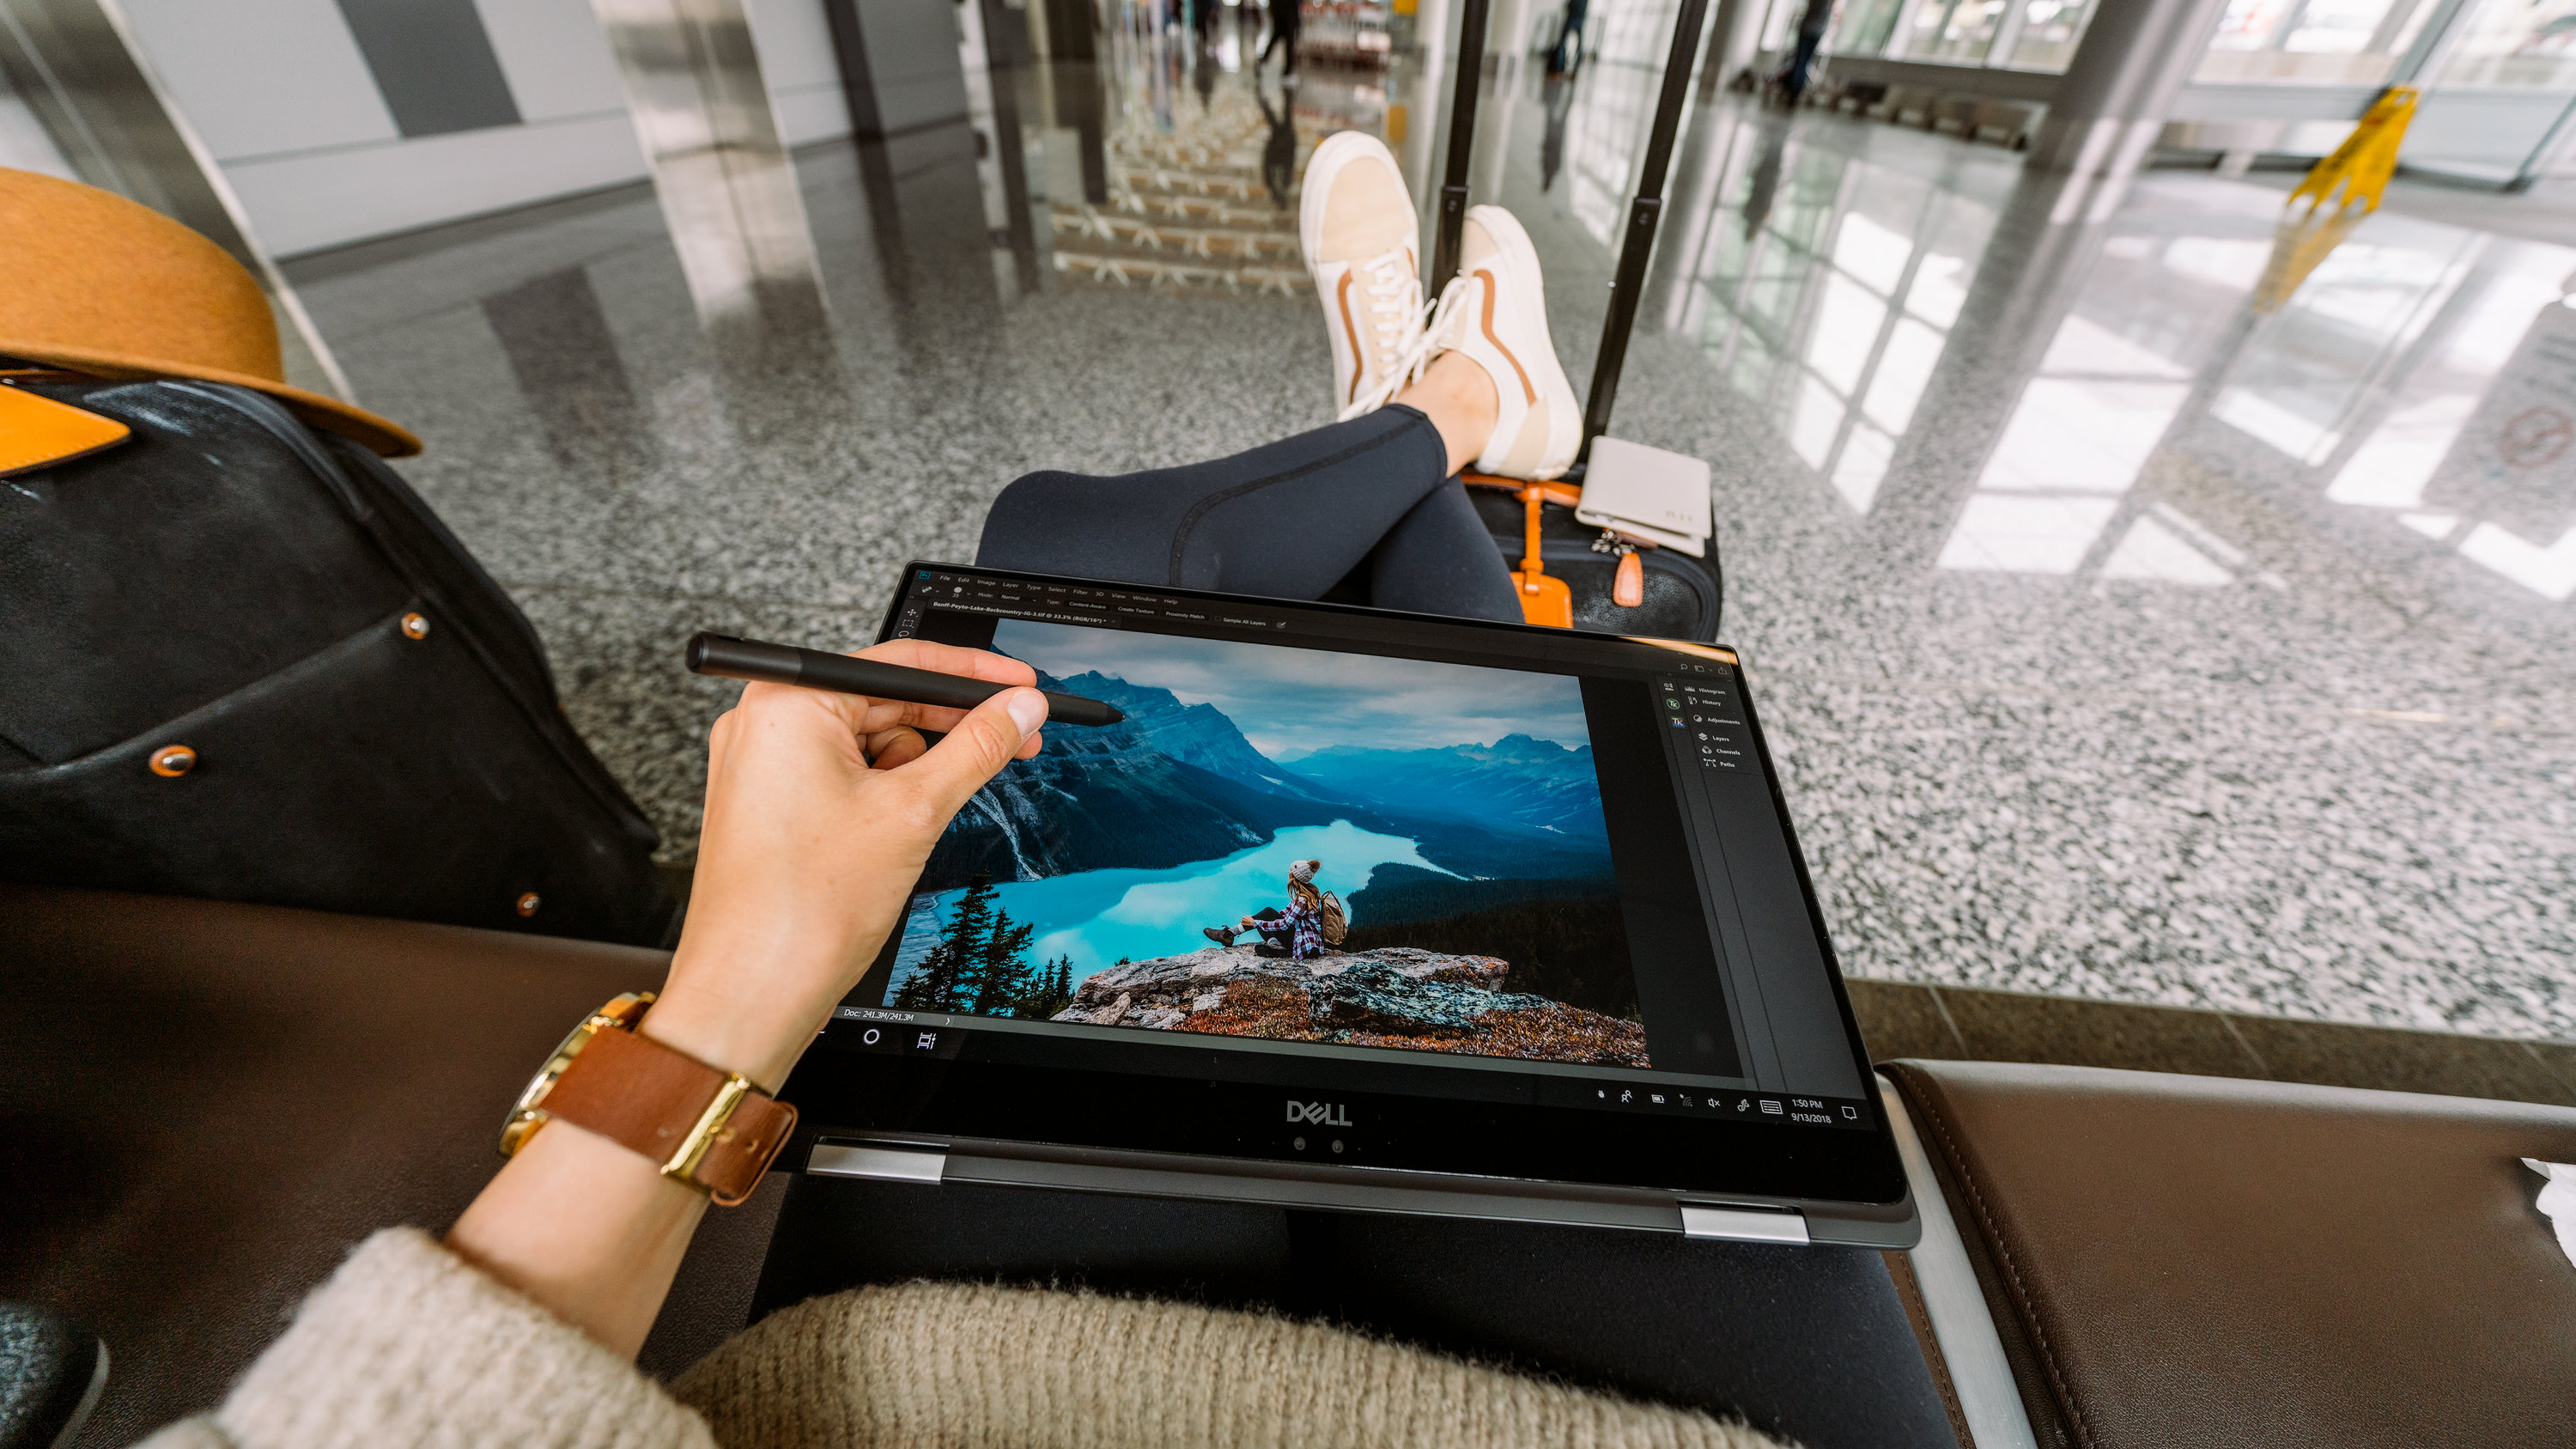 The Best Laptop for Photo Editing & Travel Blogging